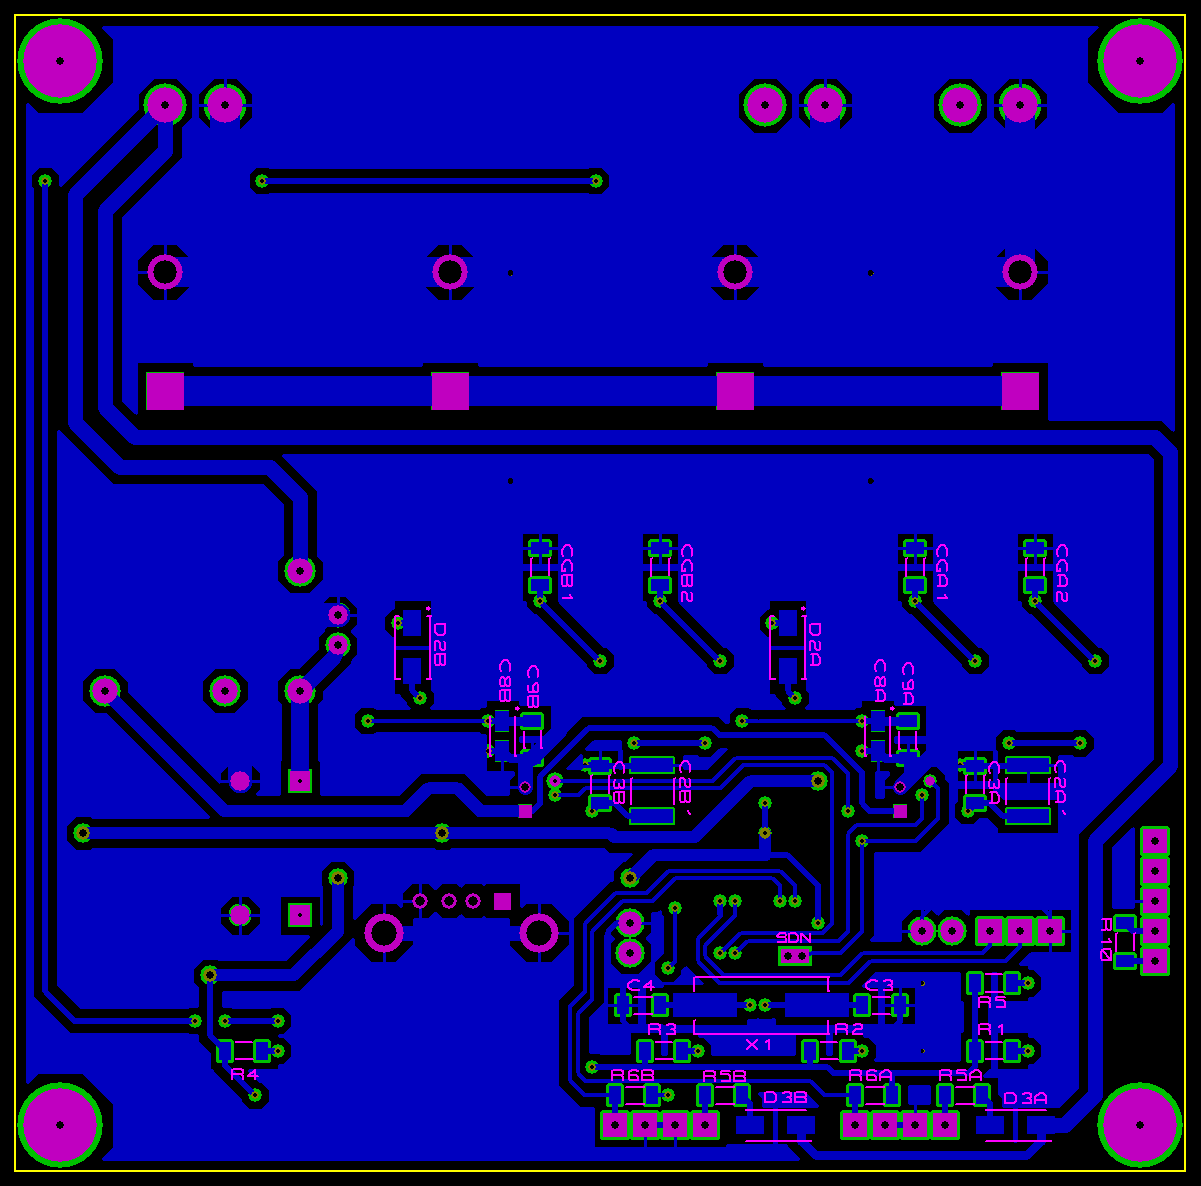 rotation-sonore_002_v1-1_pcb_components_bottom-resist